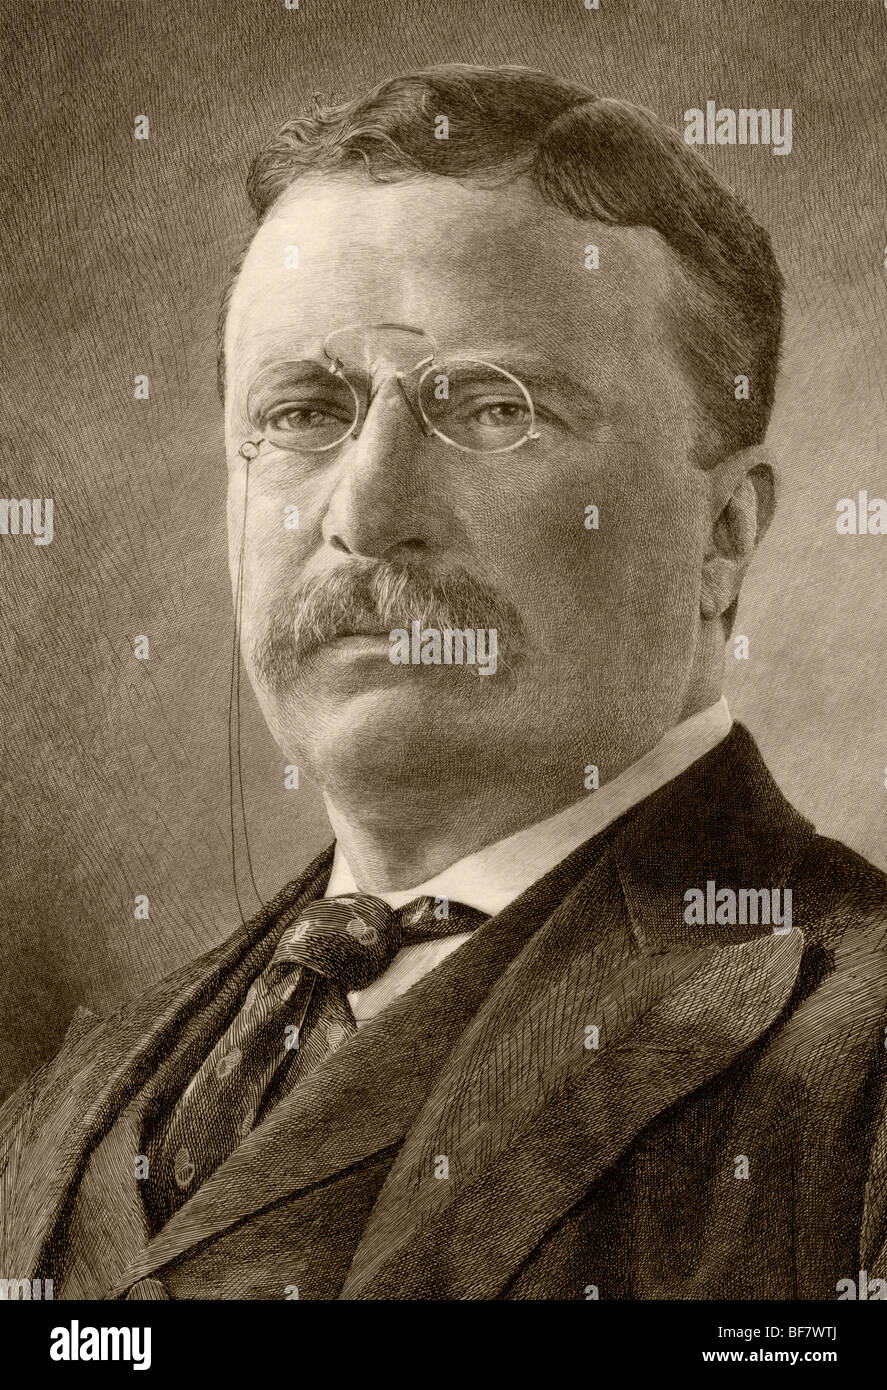 Theodore D. Roosevelt, 1858 to 1919. 26th President of the United States. Stock Photo